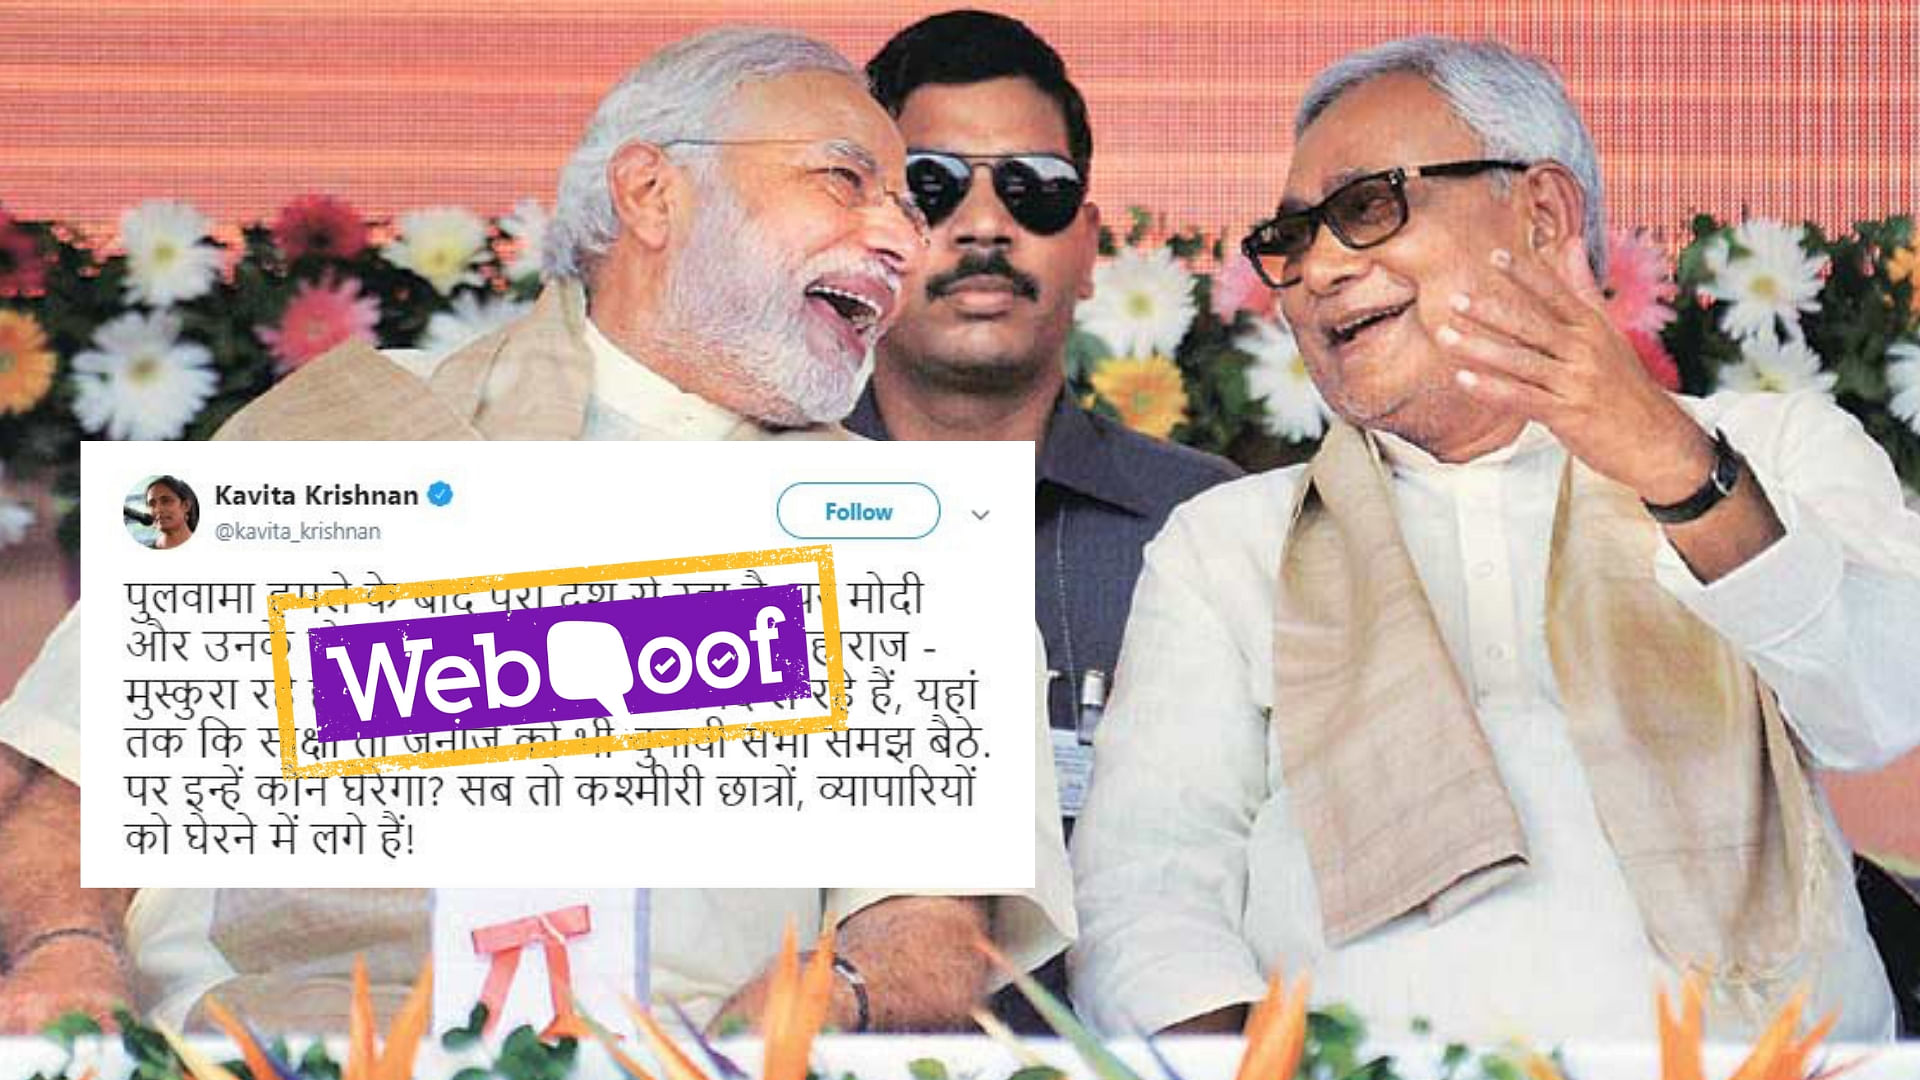 The photo is from 2015, when the PM Modi and Bihar CM Nitish Kumar had shared the stage in Patna.